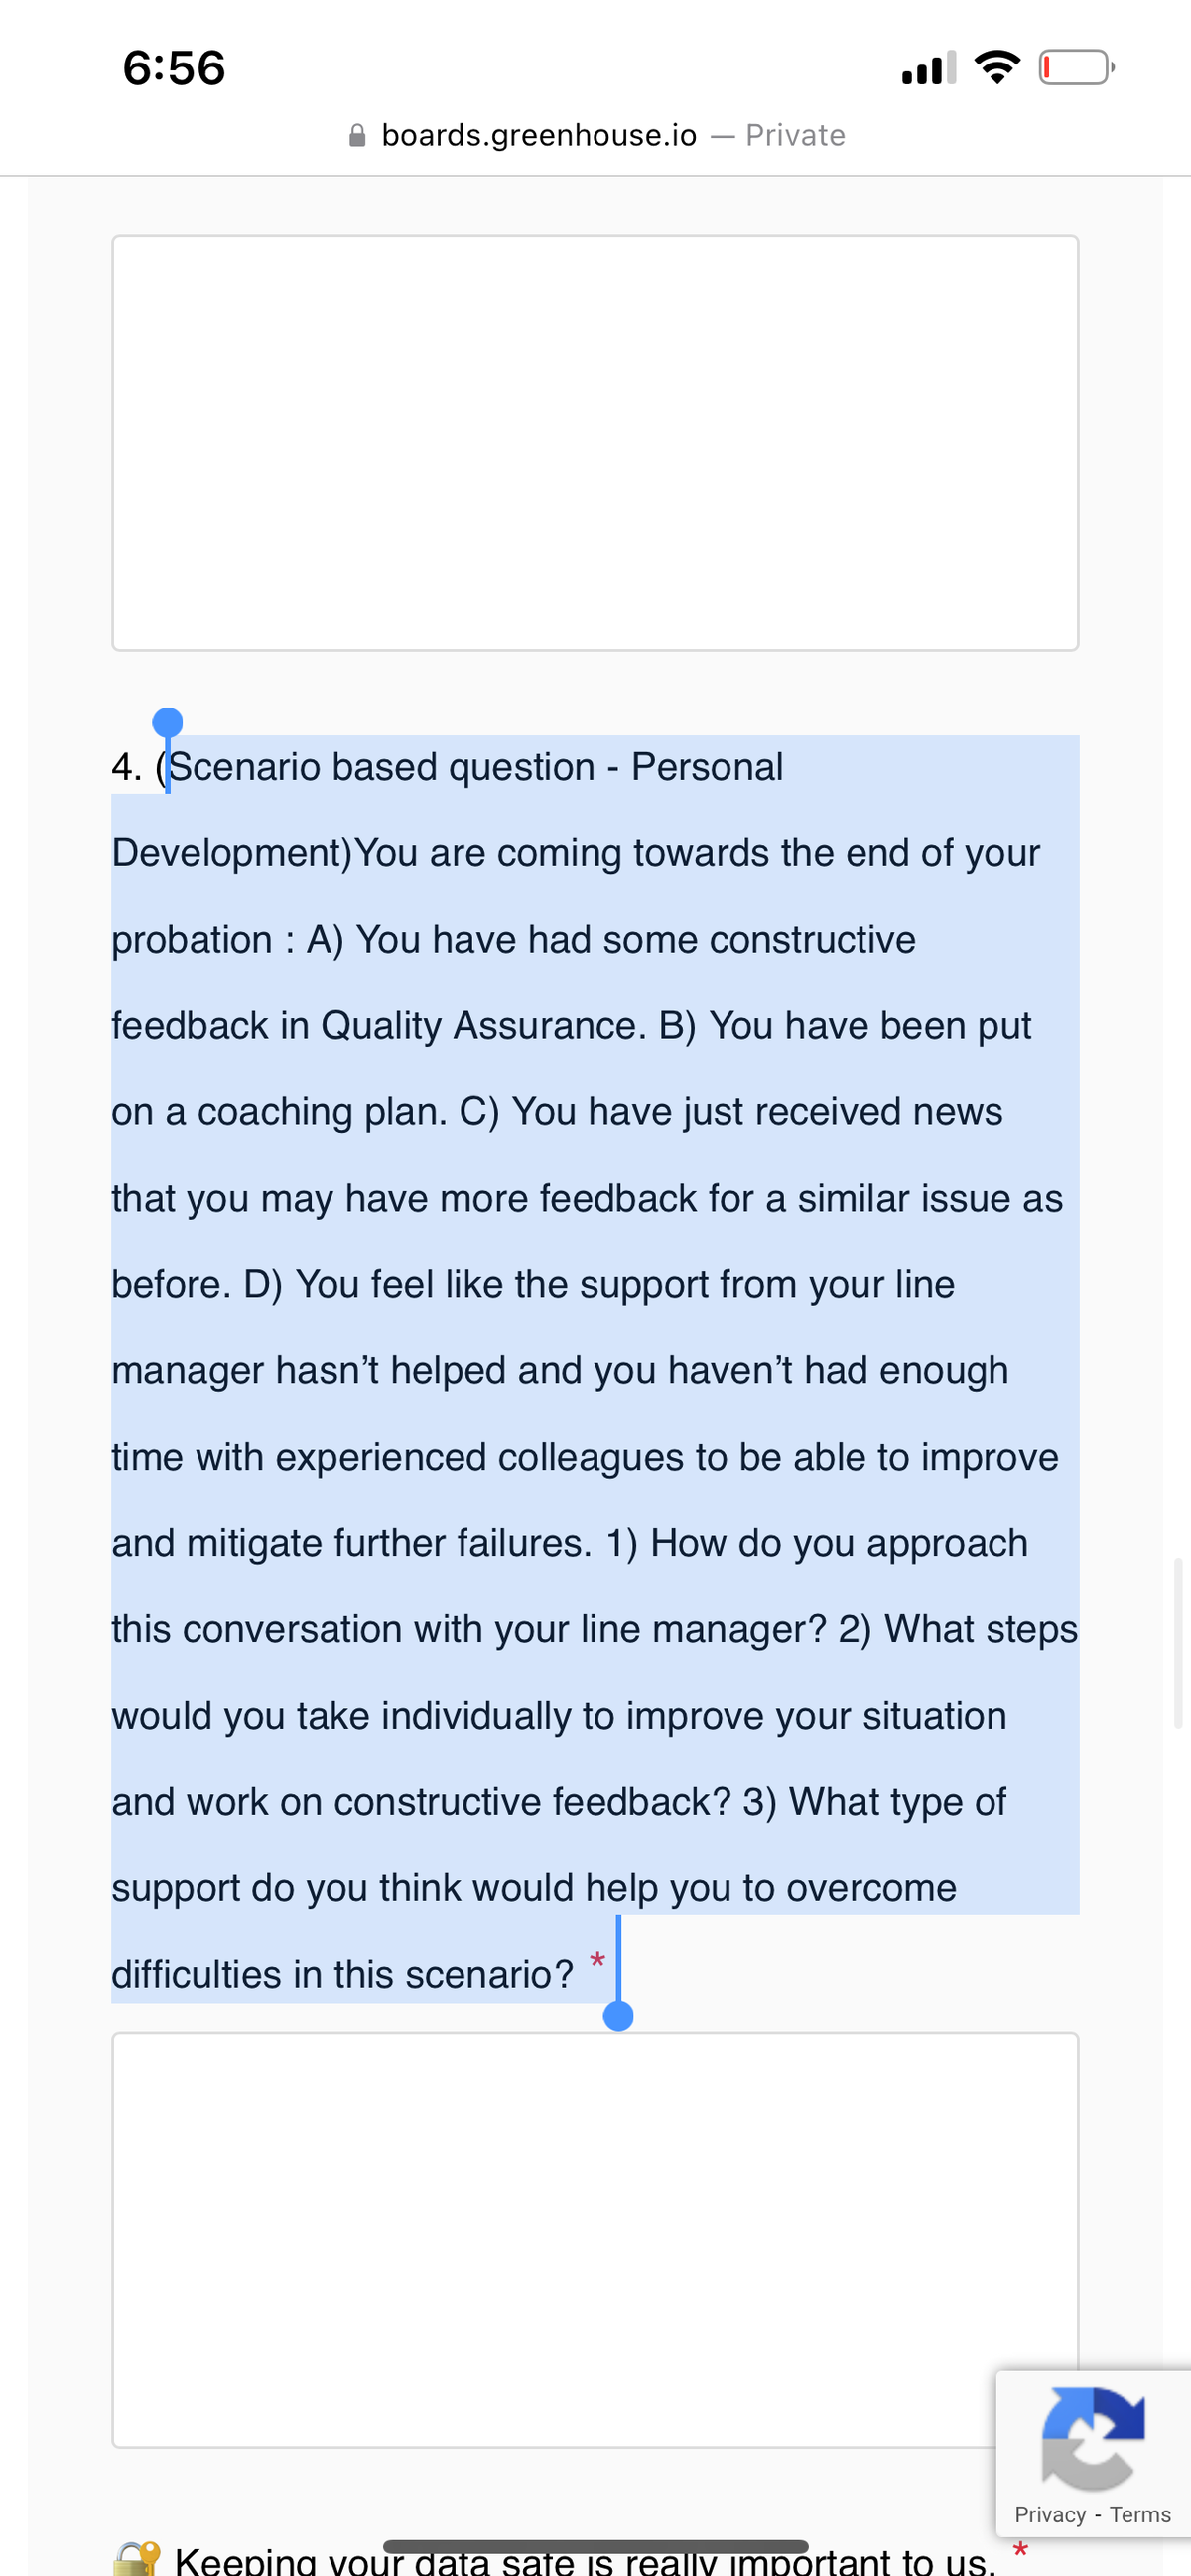 6:56
boards.greenhouse.io Private
4. (Scenario based question - Personal
Development) You are coming towards the end of your
probation : A) You have had some constructive
feedback in Quality Assurance. B) You have been put
on a coaching plan. C) You have just received news
that you may have more feedback for a similar issue as
before. D) You feel like the support from your line
manager hasn't helped and you haven't had enough
time with experienced colleagues to be able to improve
and mitigate further failures. 1) How do you approach
this conversation with your line manager? 2) What steps
would you take individually to improve your situation
and work on constructive feedback? 3) What type of
support do you think would help you to overcome
difficulties in this scenario?
★
Keeping your data sate is really important to us.
Privacy - Terms
*